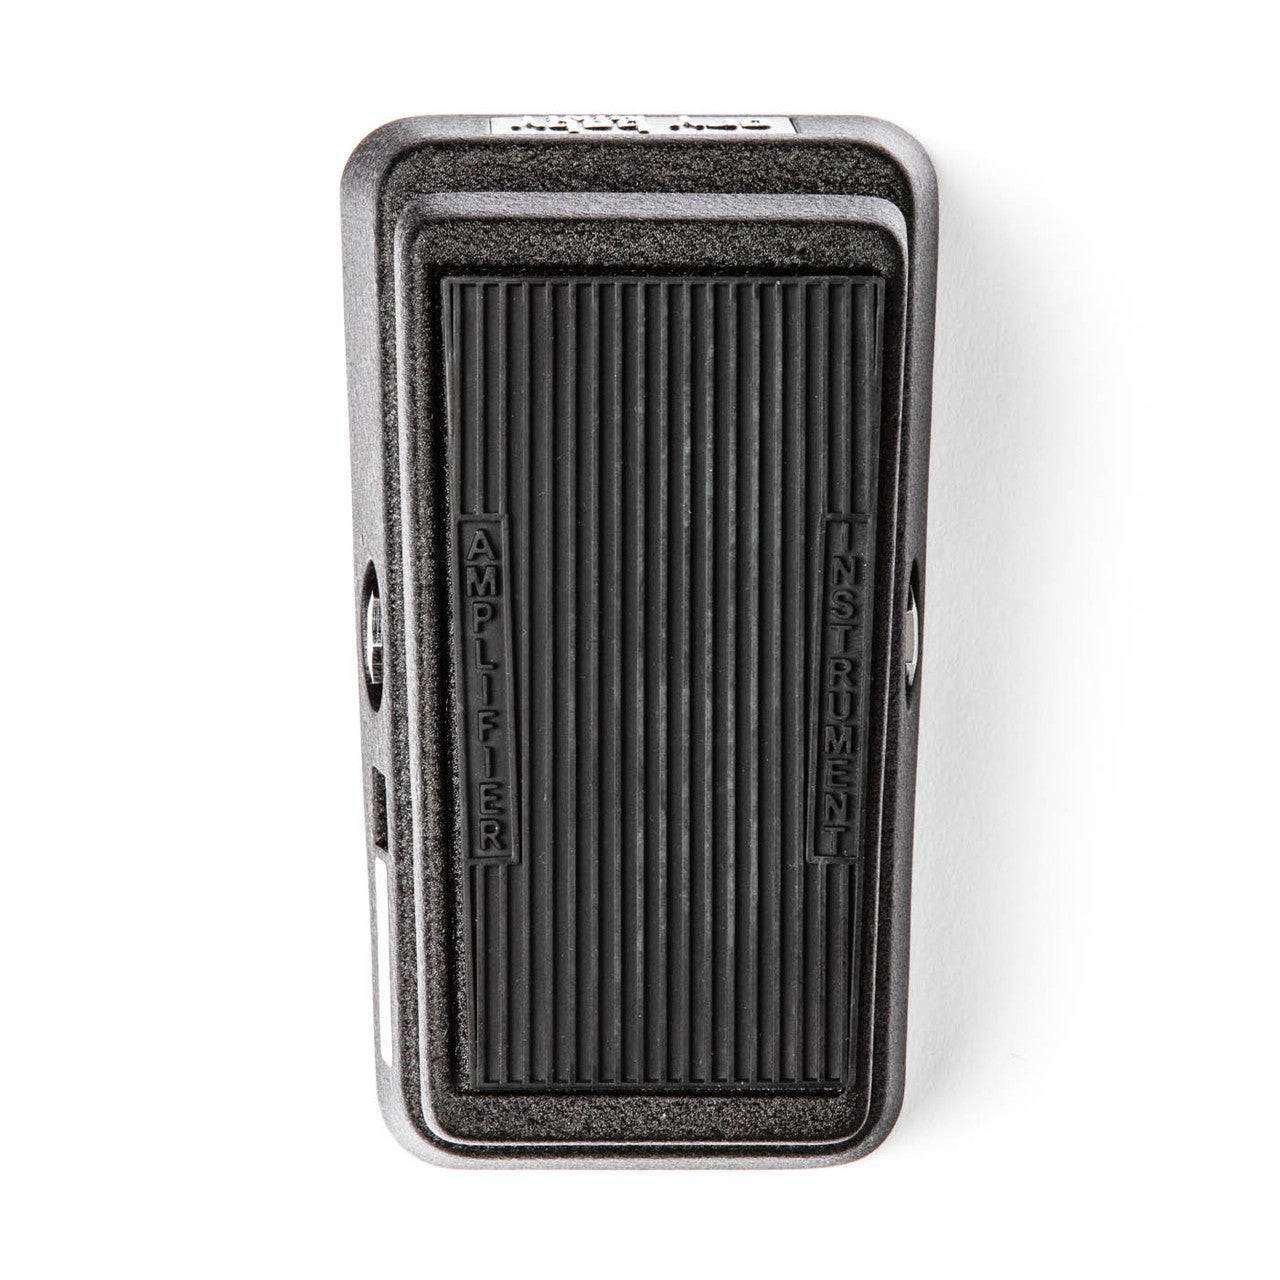 DUNLOP CBM95 CRYBABY MINI WAH EFFECTS PEDAL - Joondalup Music Centre